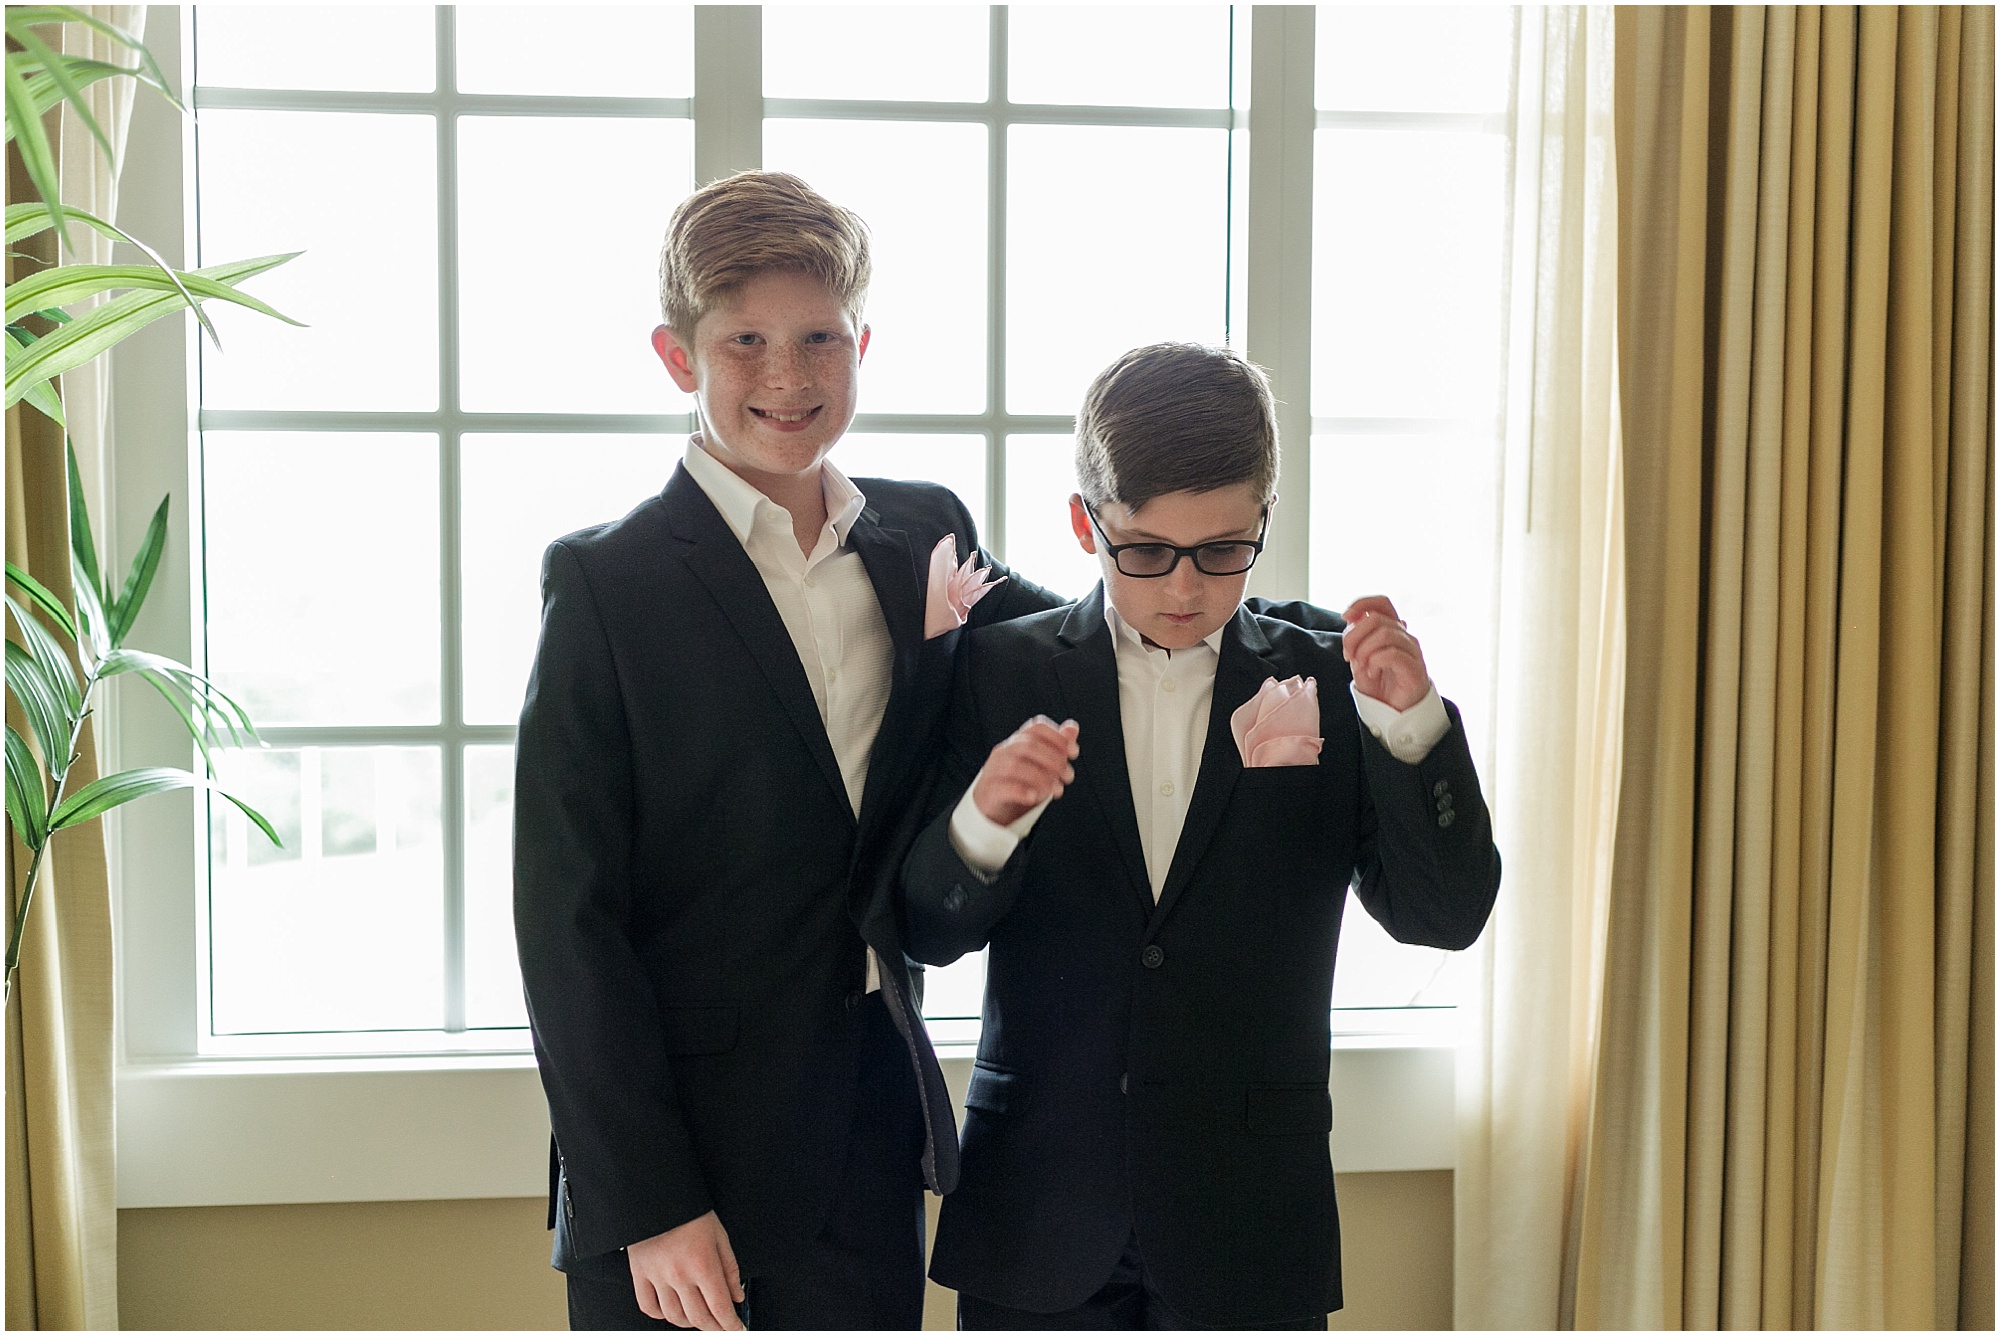 Boys surprised after seeing their mom on her wedding day